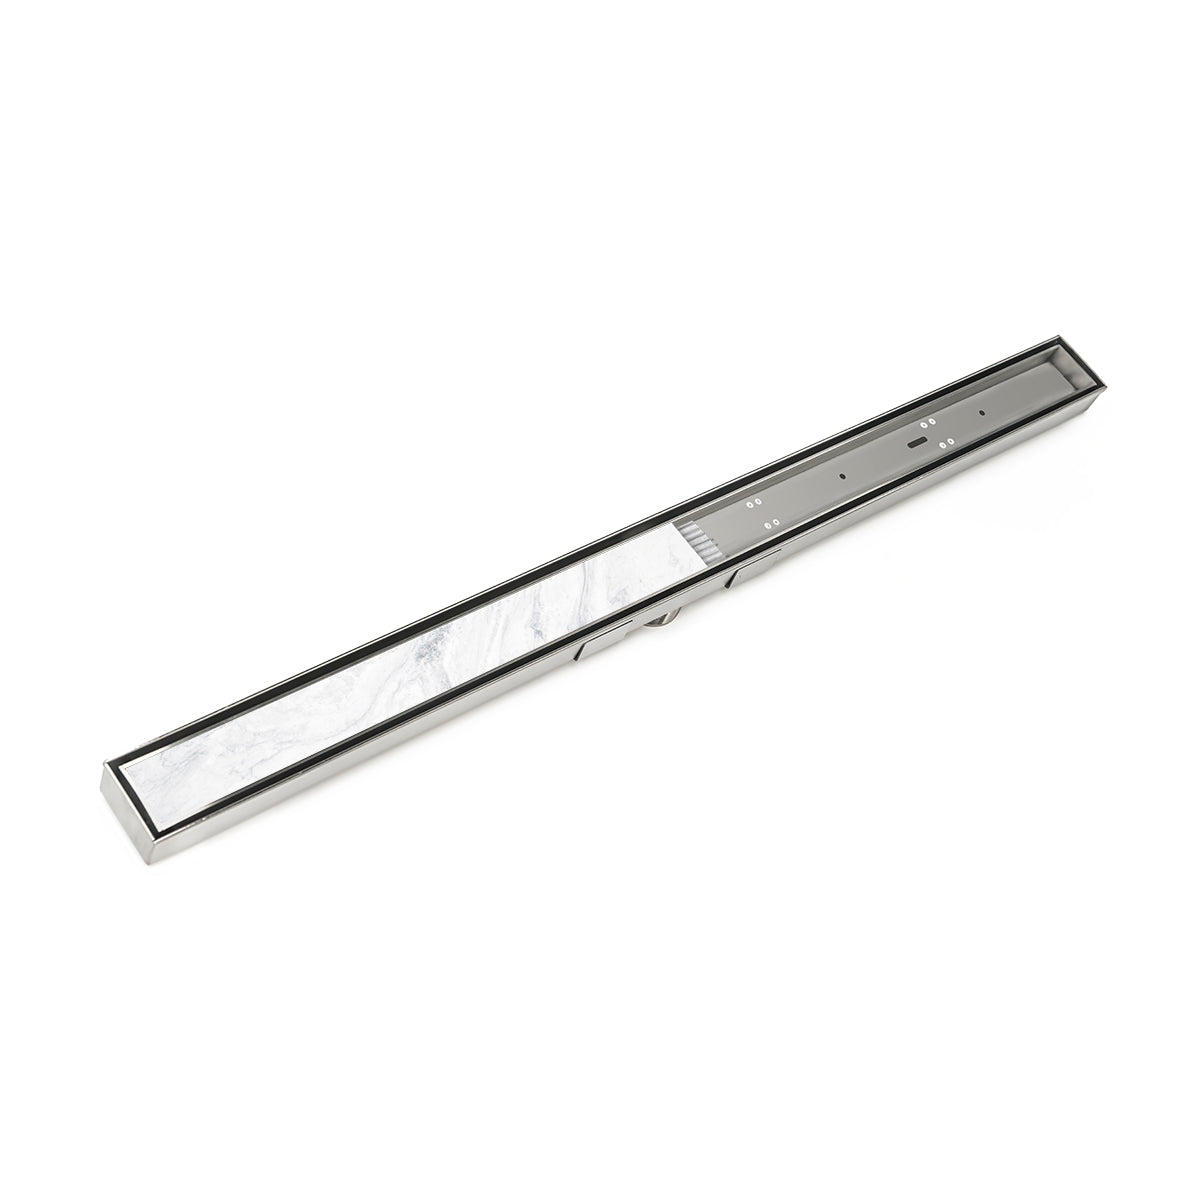 Infinity Drain 36" S-Stainless Steel Series High Flow Site Sizable Linear Drain Kit with Low Profile Tile Insert Frame with ABS Drain Body, 3" Outlet